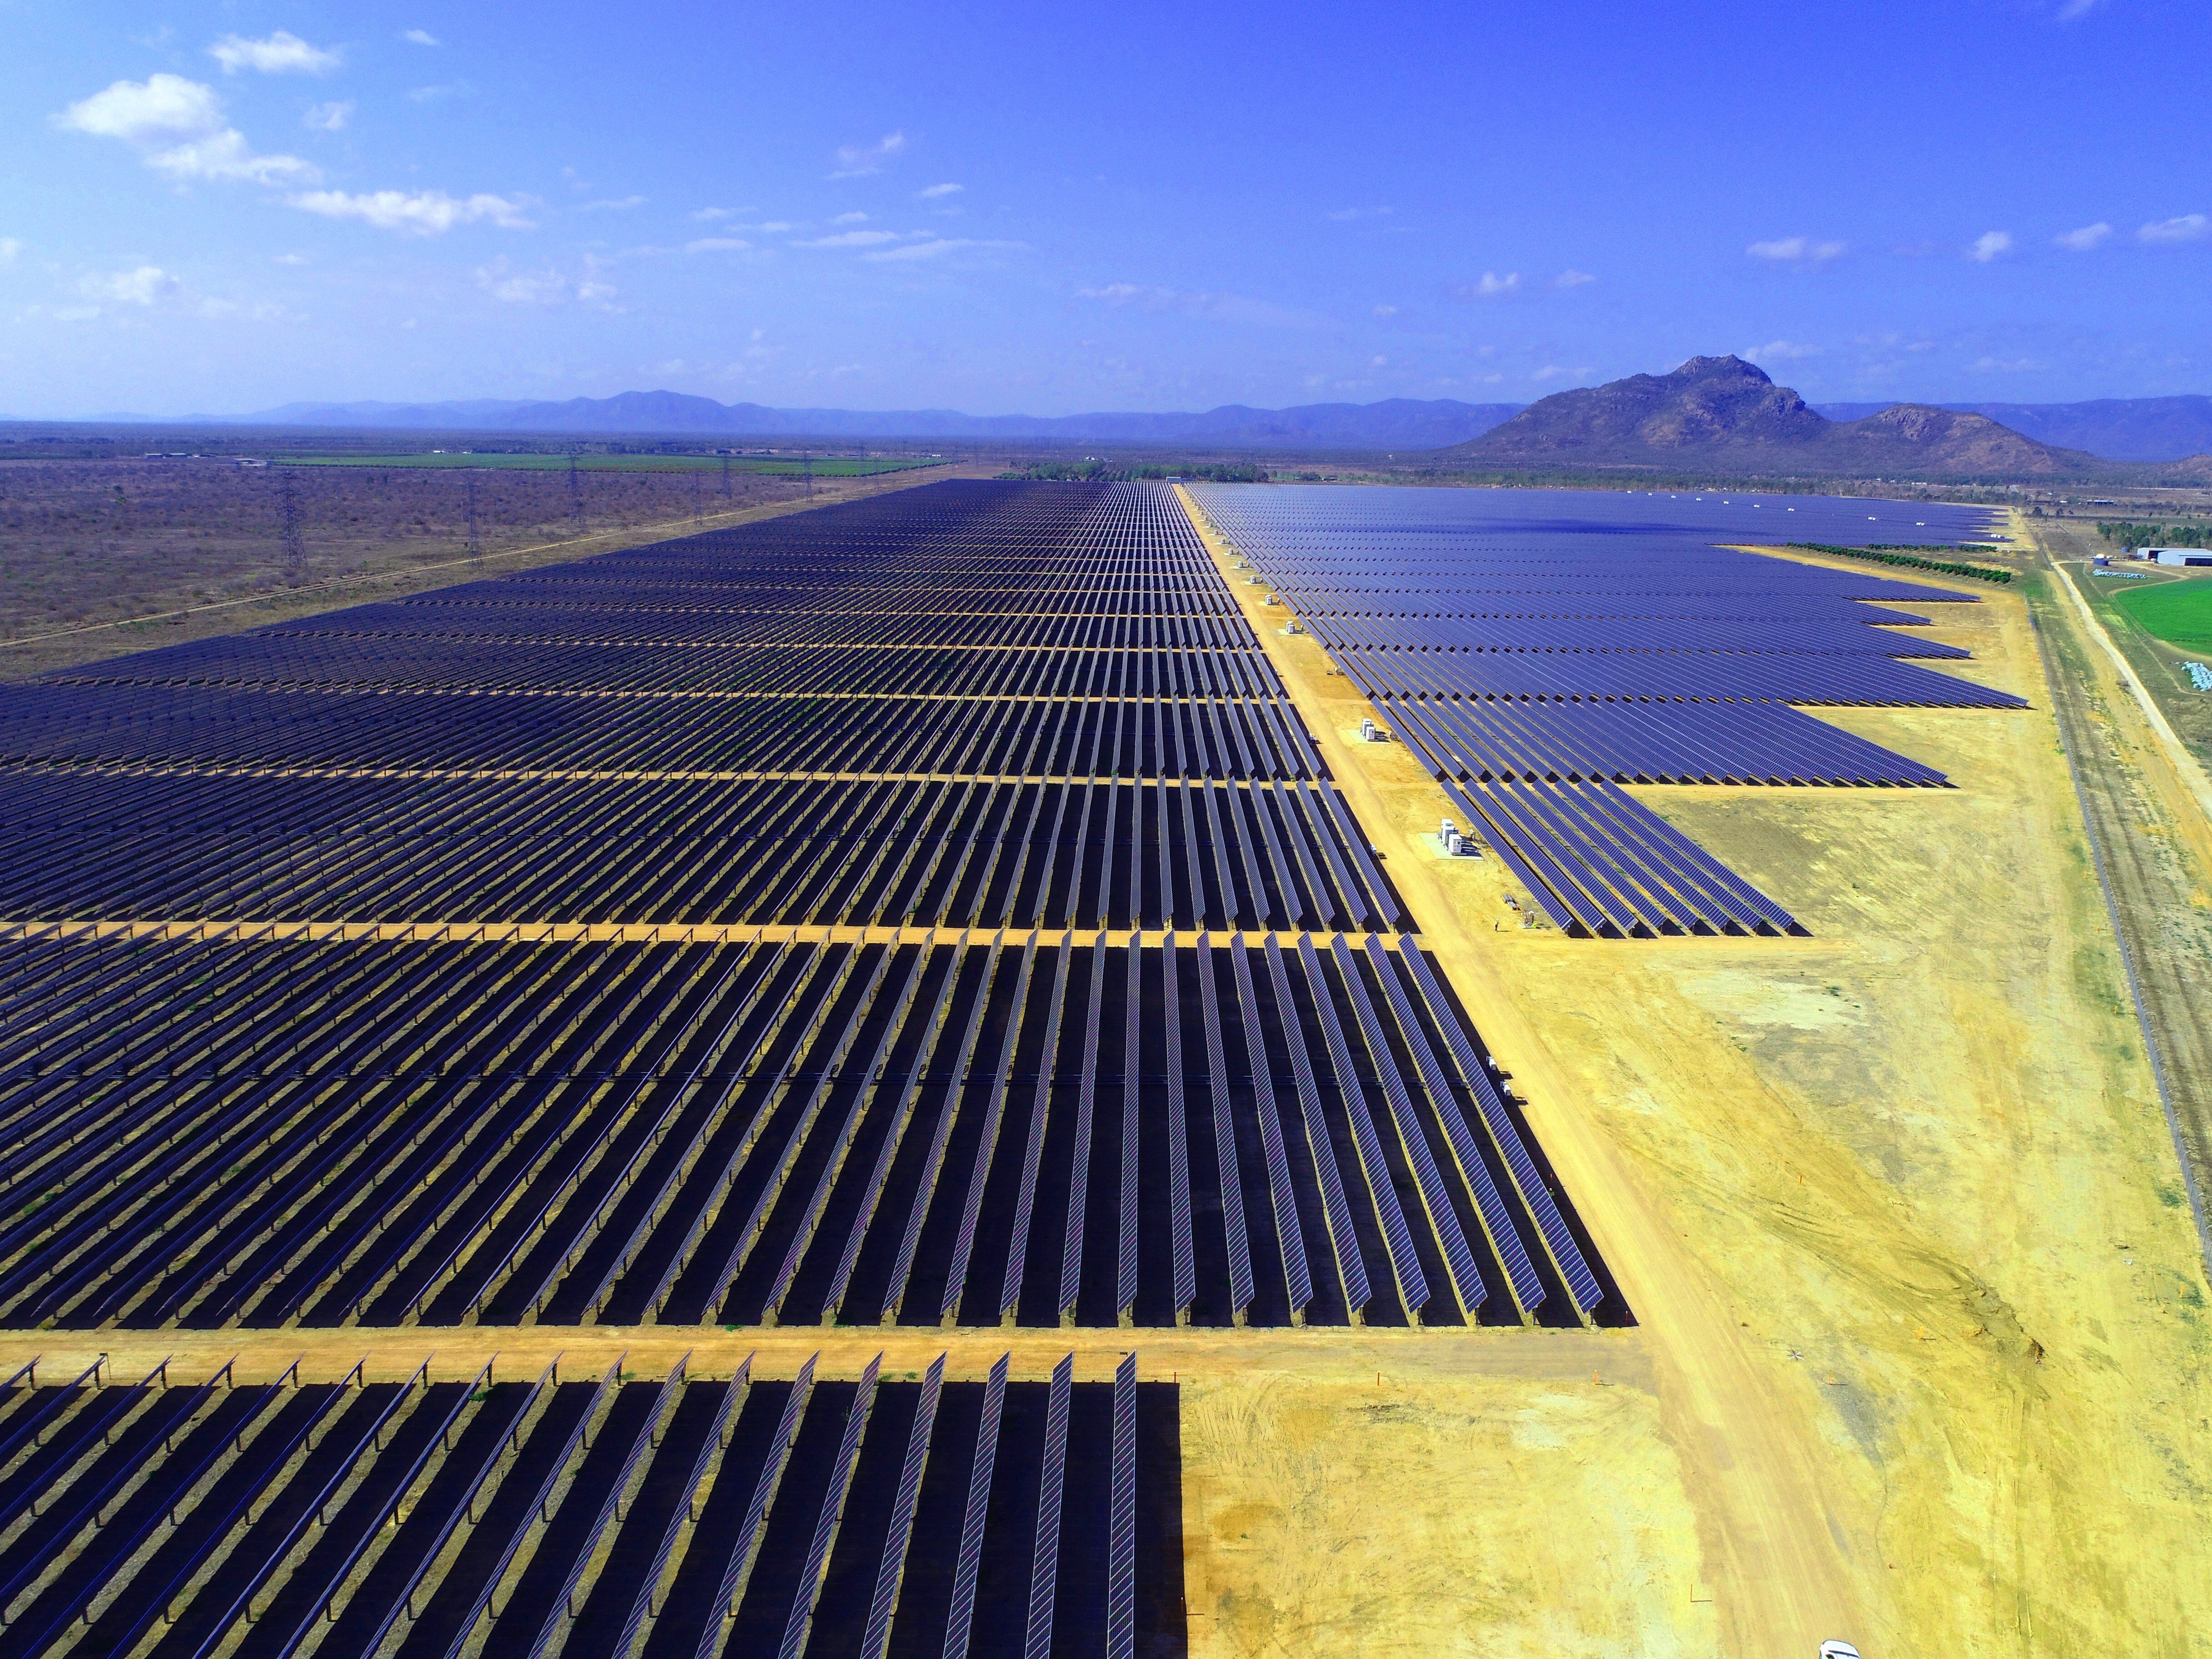 Singapore’s Sun Cable plans to build a solar farm in the Northern Territory, Australia. Photo: Shutterstock